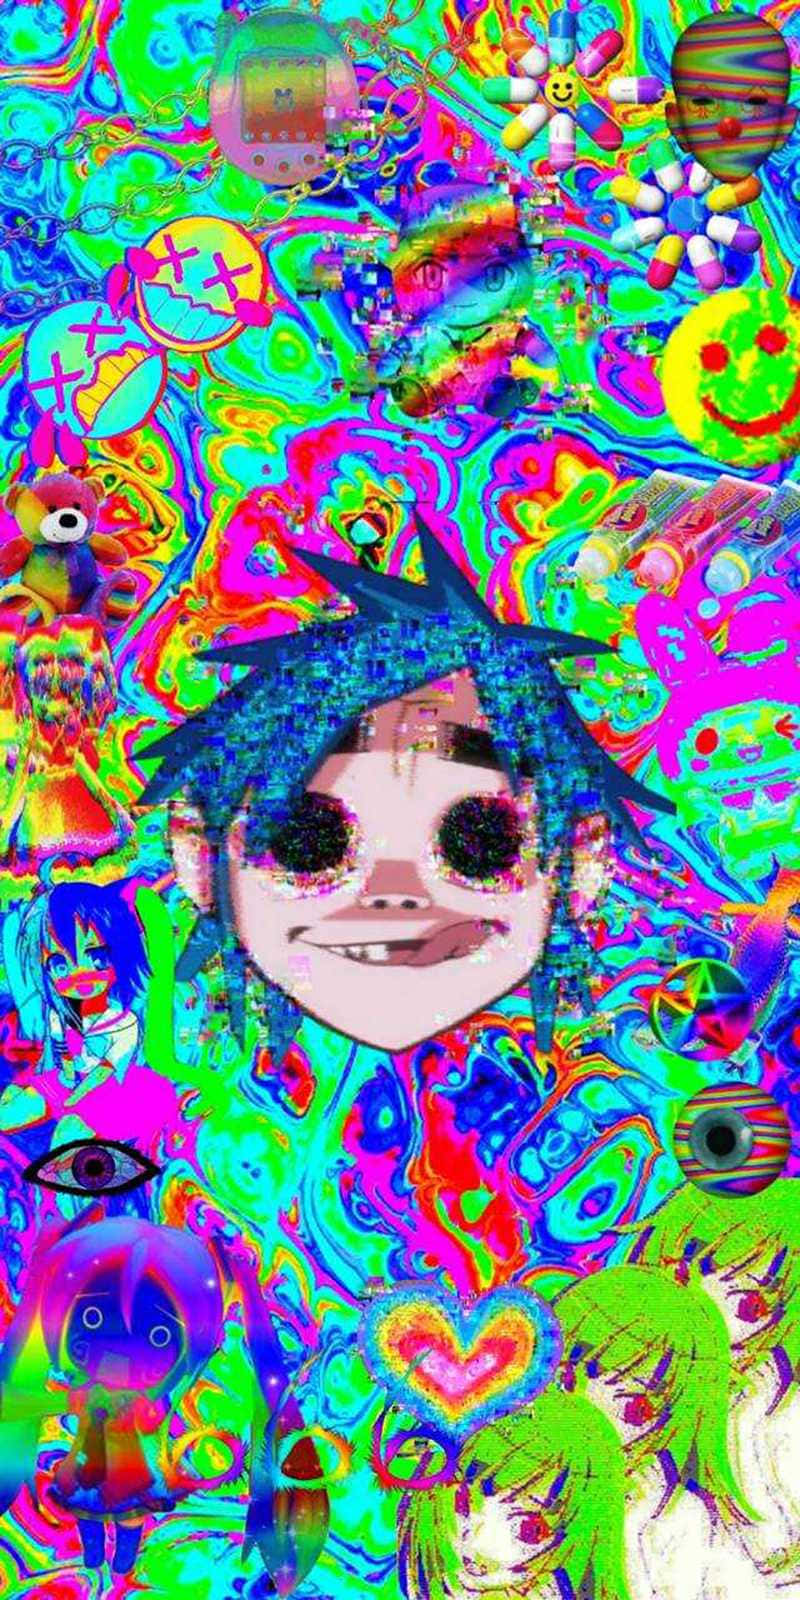 Psychedelic and colorful Glitchcore art brings new life to digital artistry